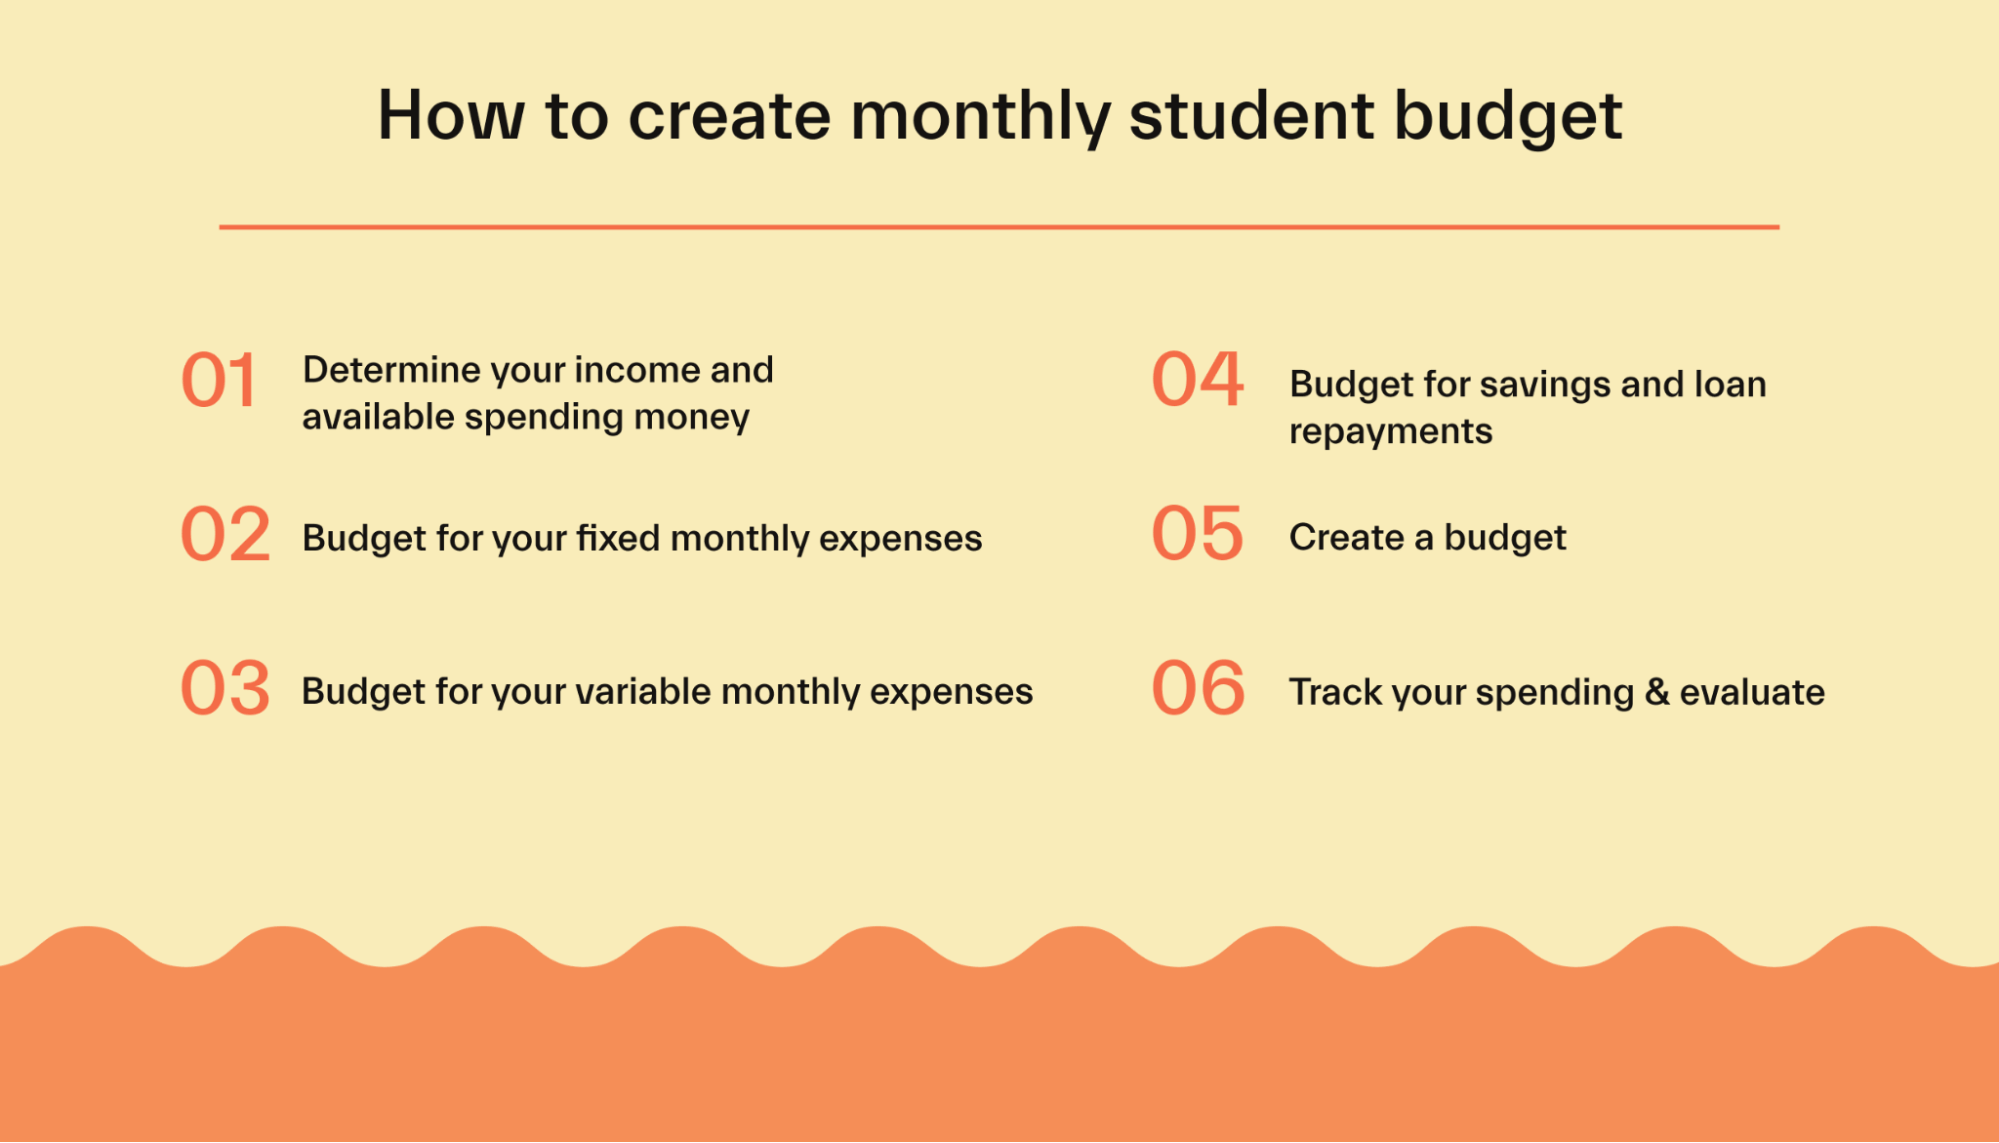 How to create monthly student budget